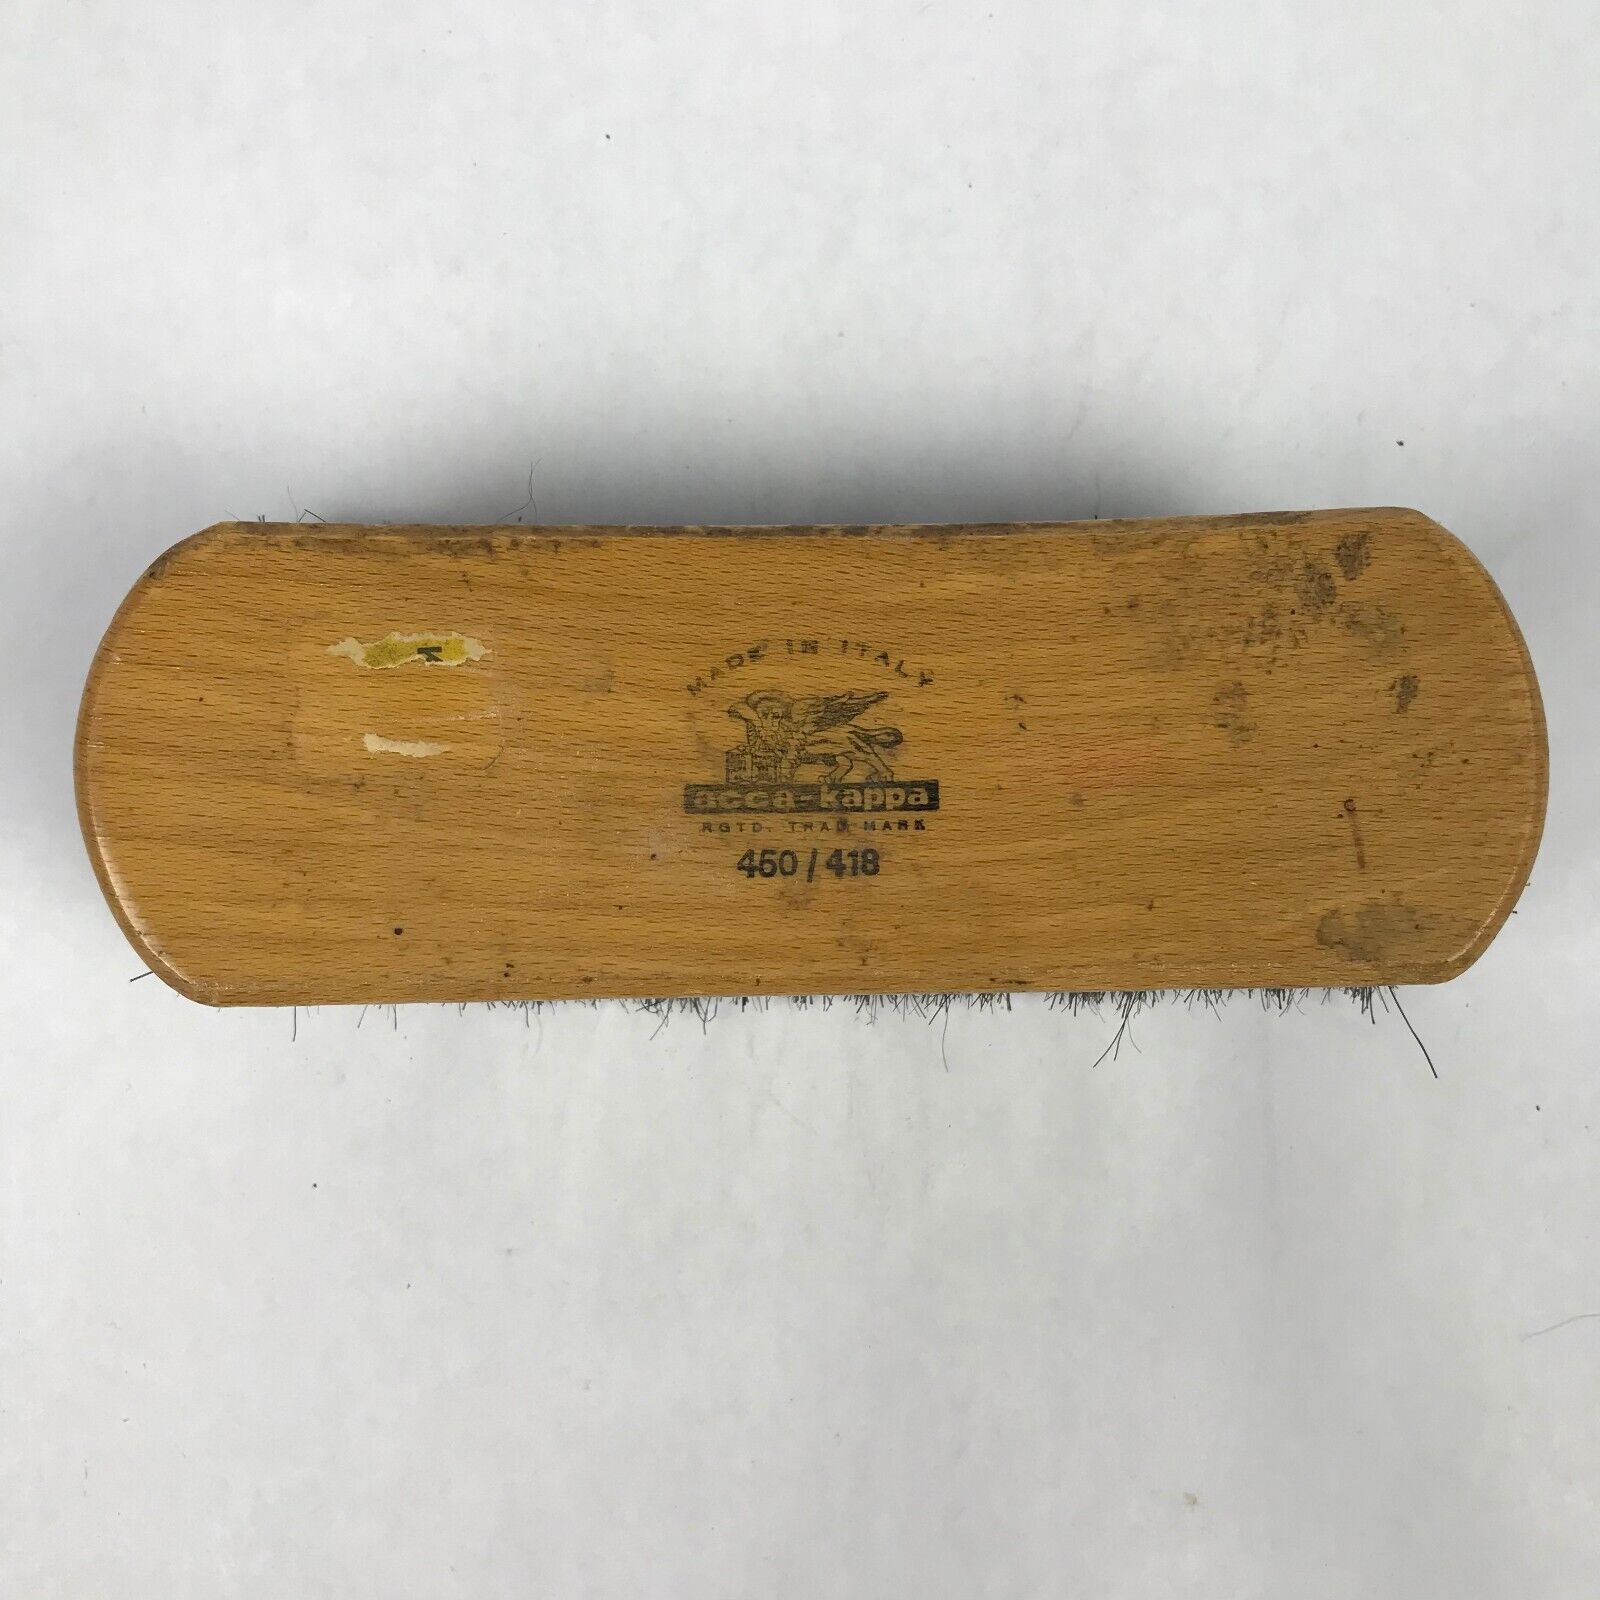 Acca-kappa Shoe Shine Brush Horse Hair 450/418 Made In Italy 6.5" Vintage